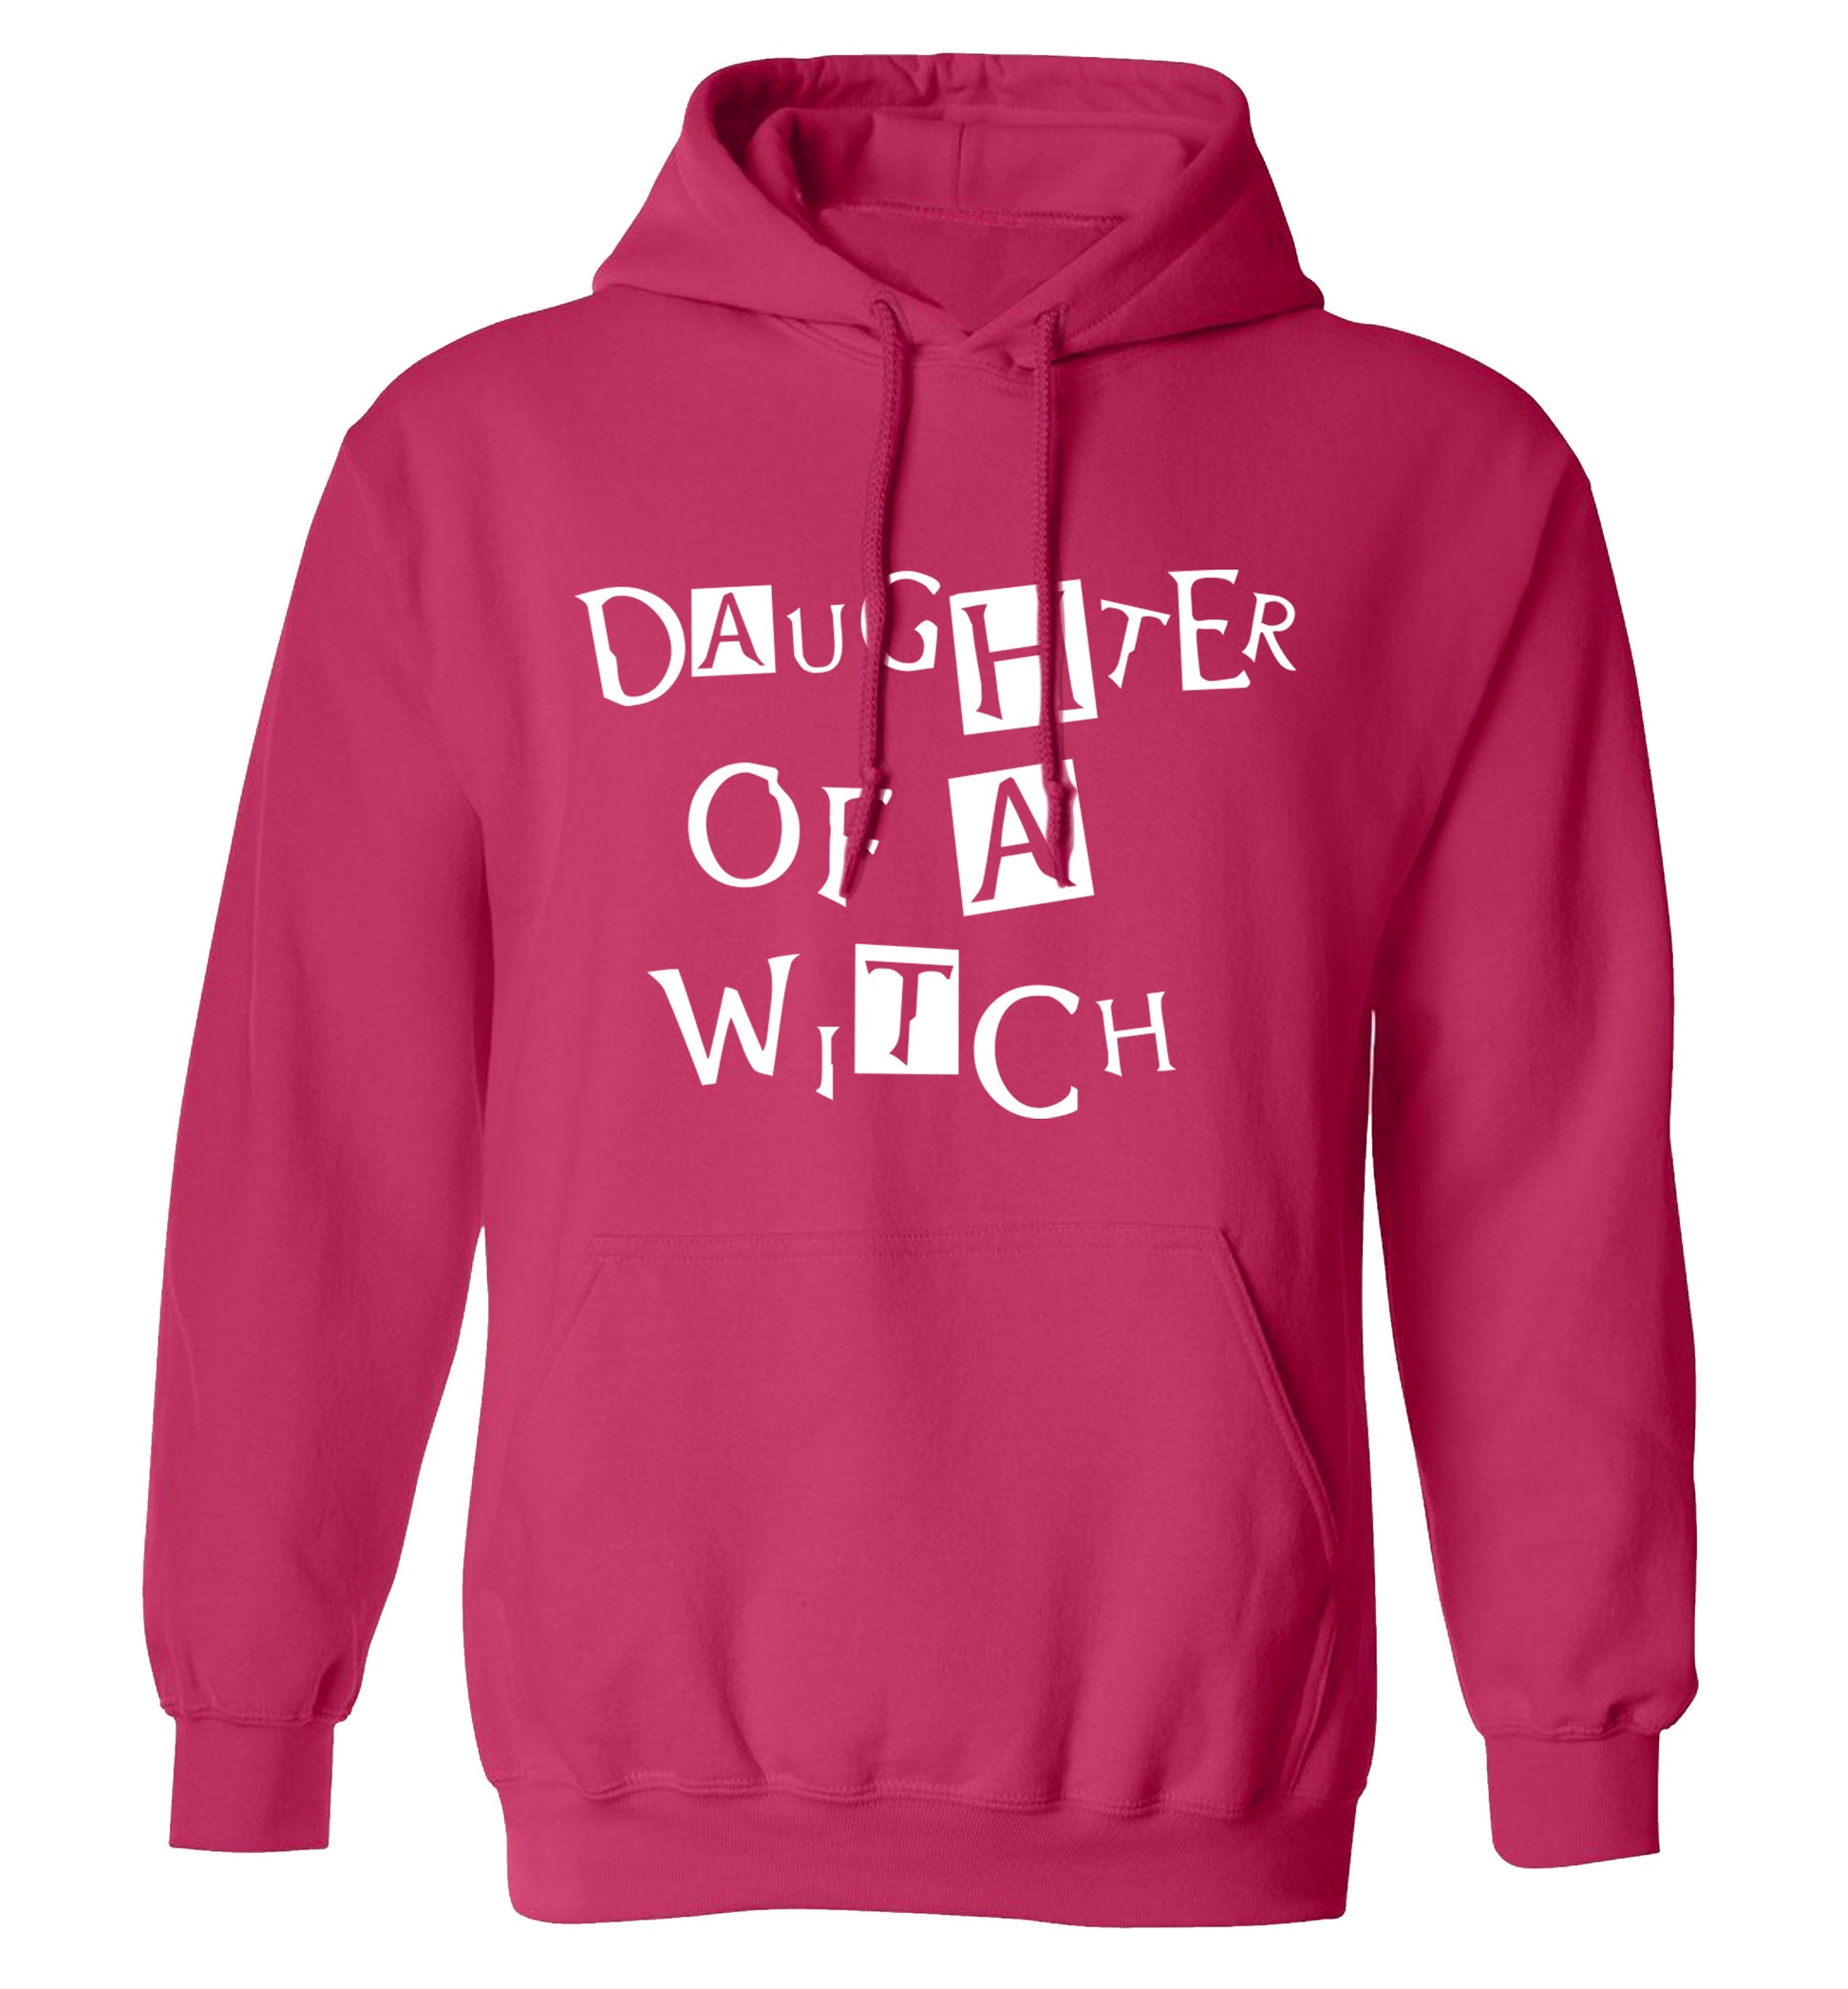 Daughter of a witch adults unisex pink hoodie 2XL